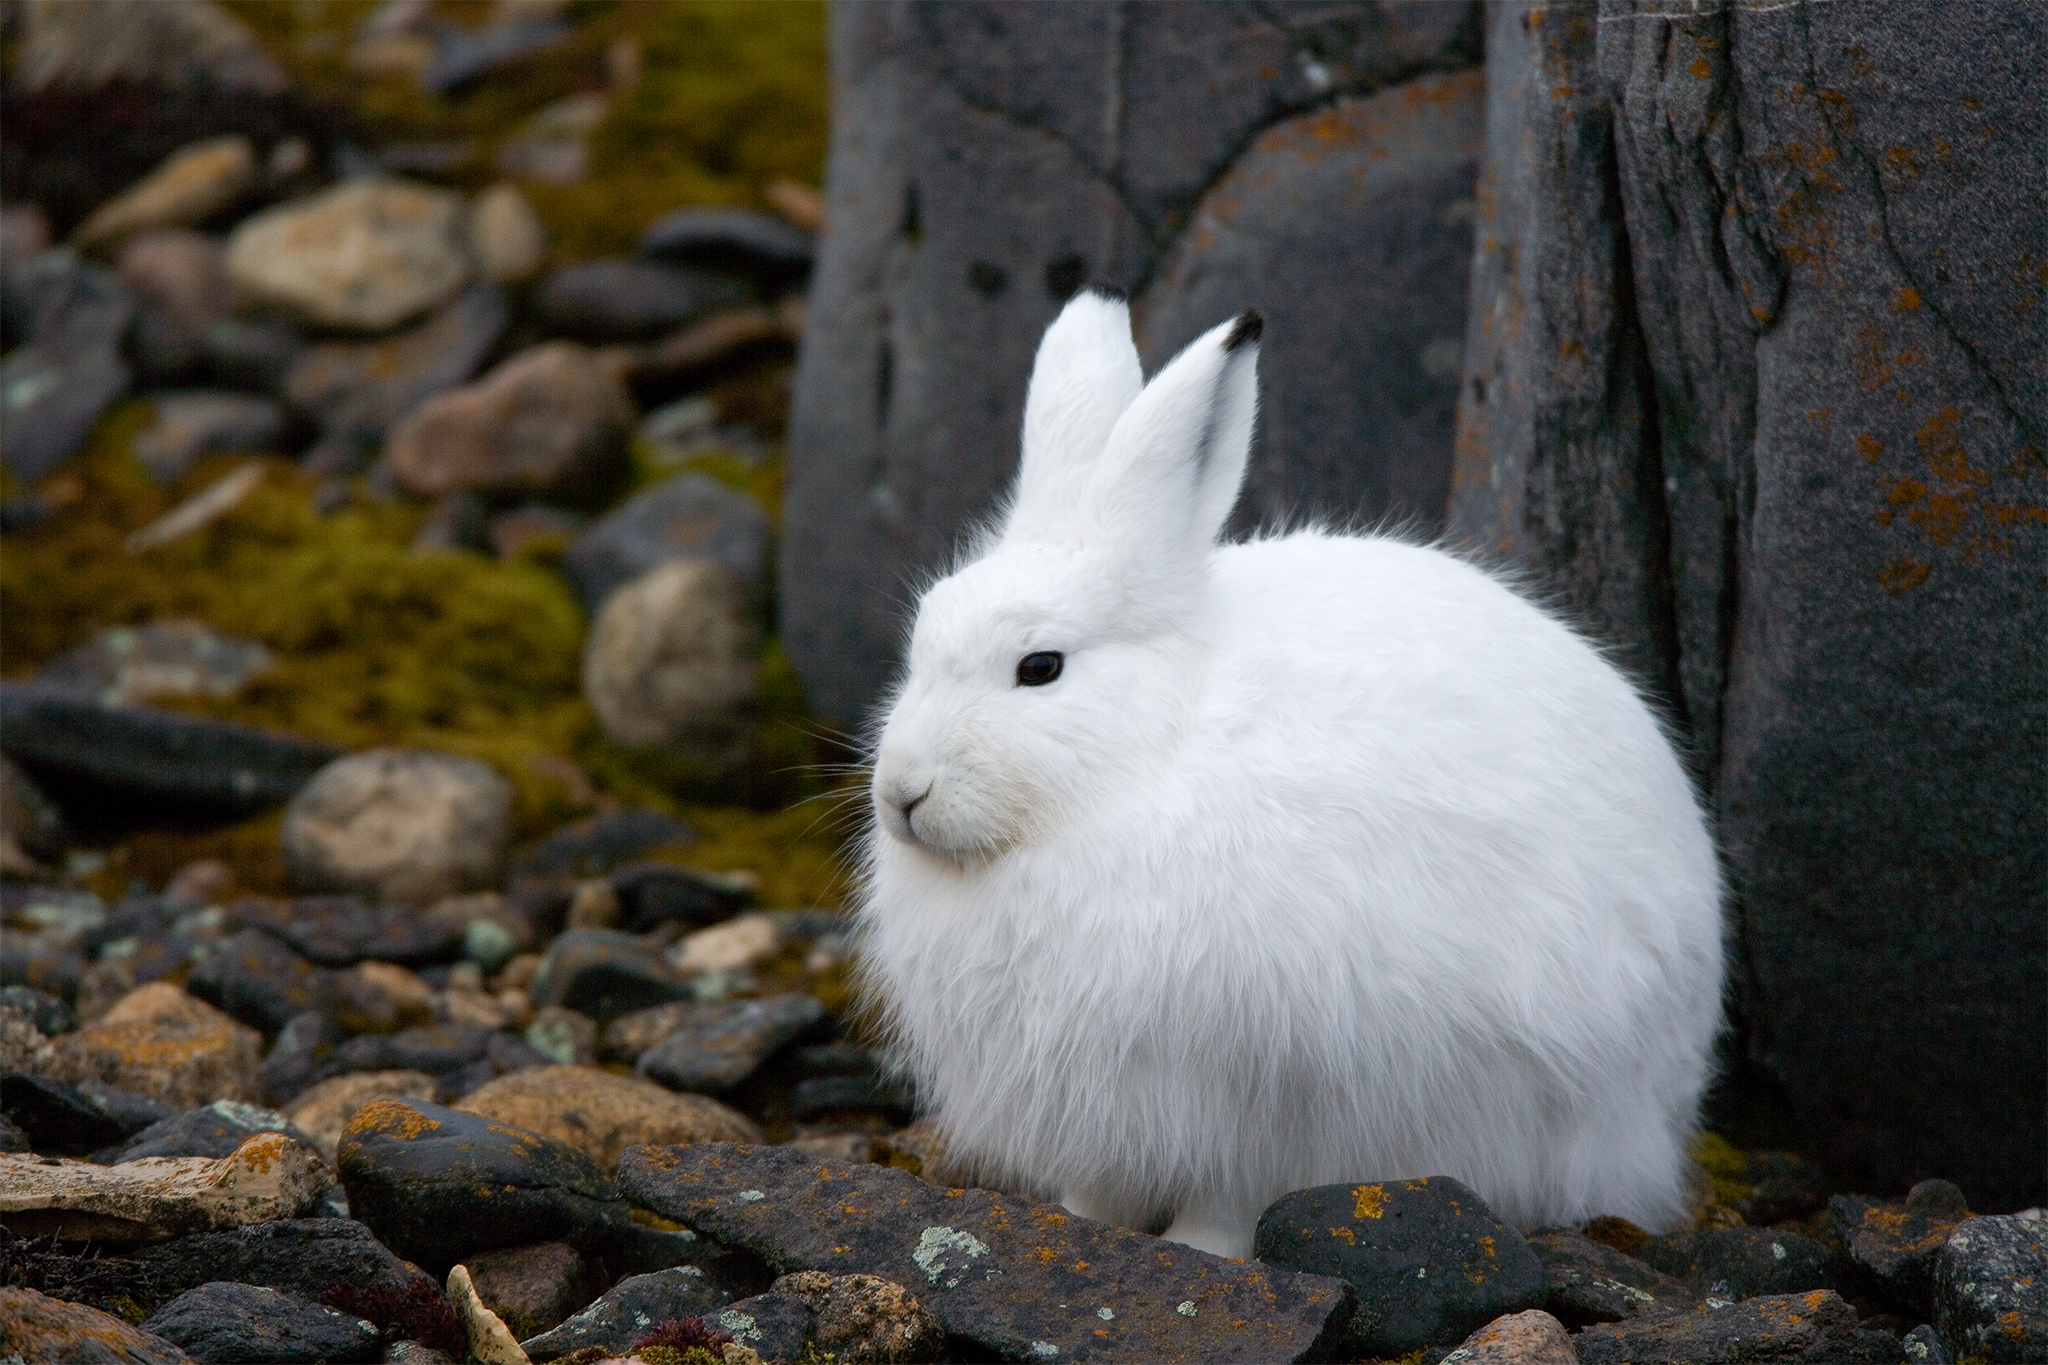 Can Snowshoe Hares Evolve to Cope With Climate Change?